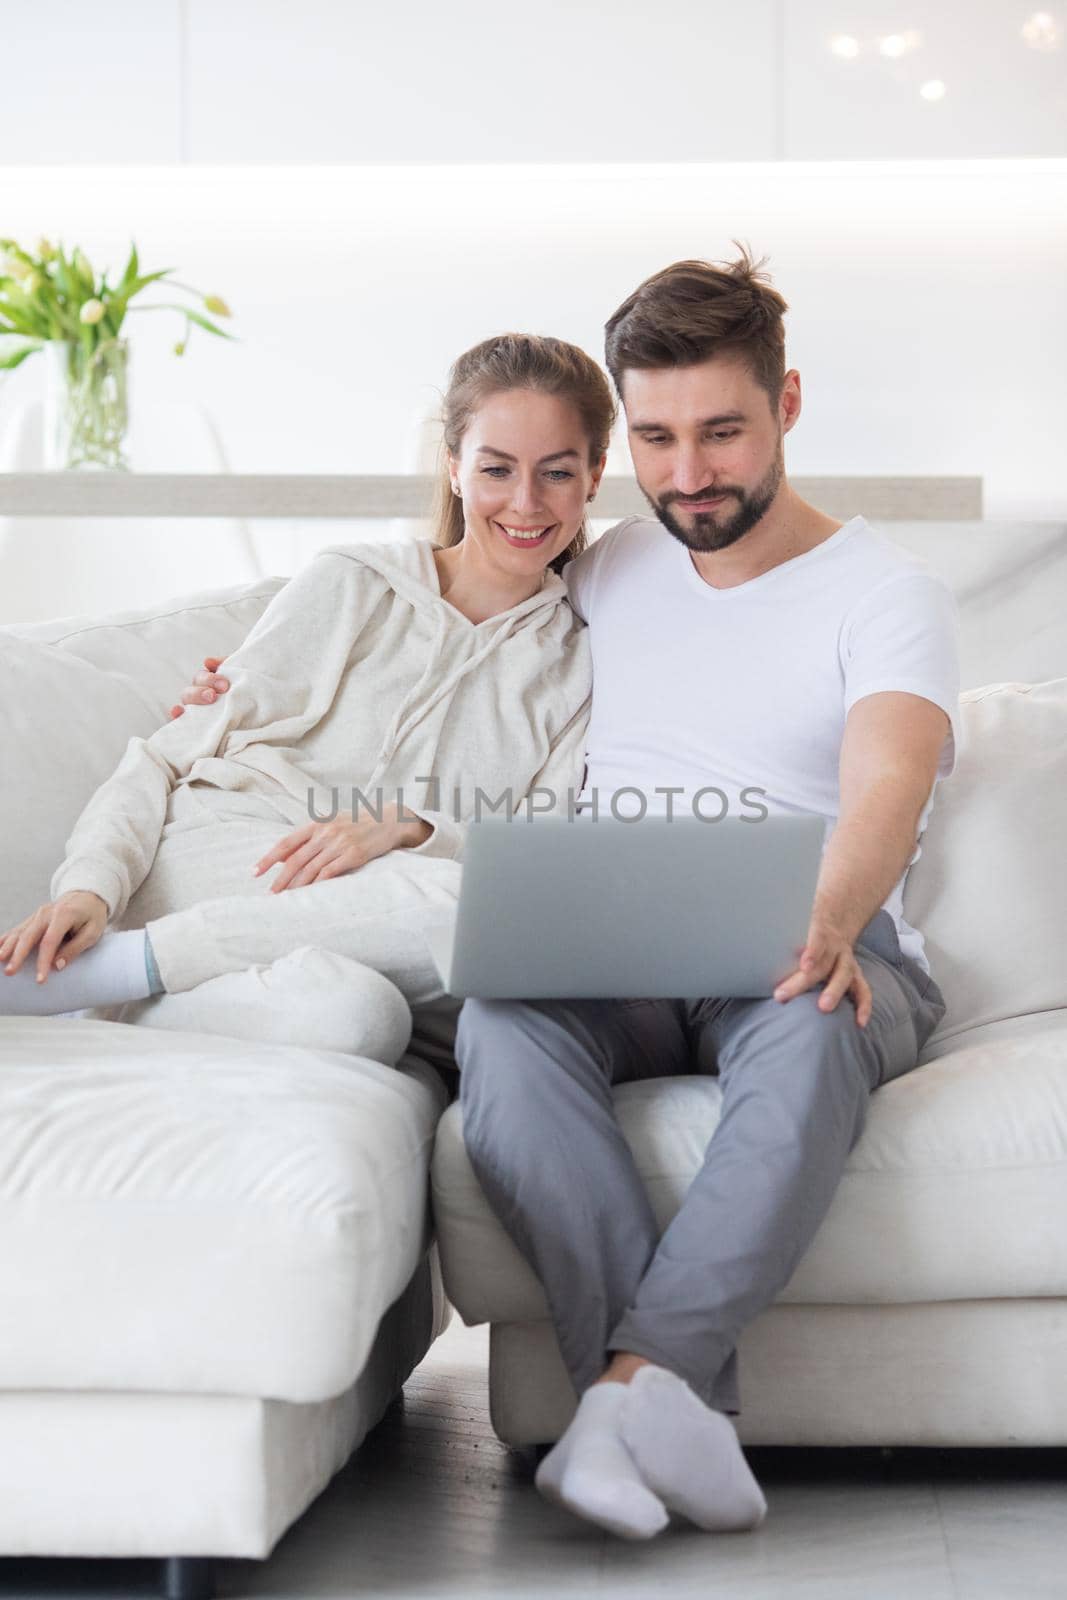 Couple browsing internet in living room by ALotOfPeople